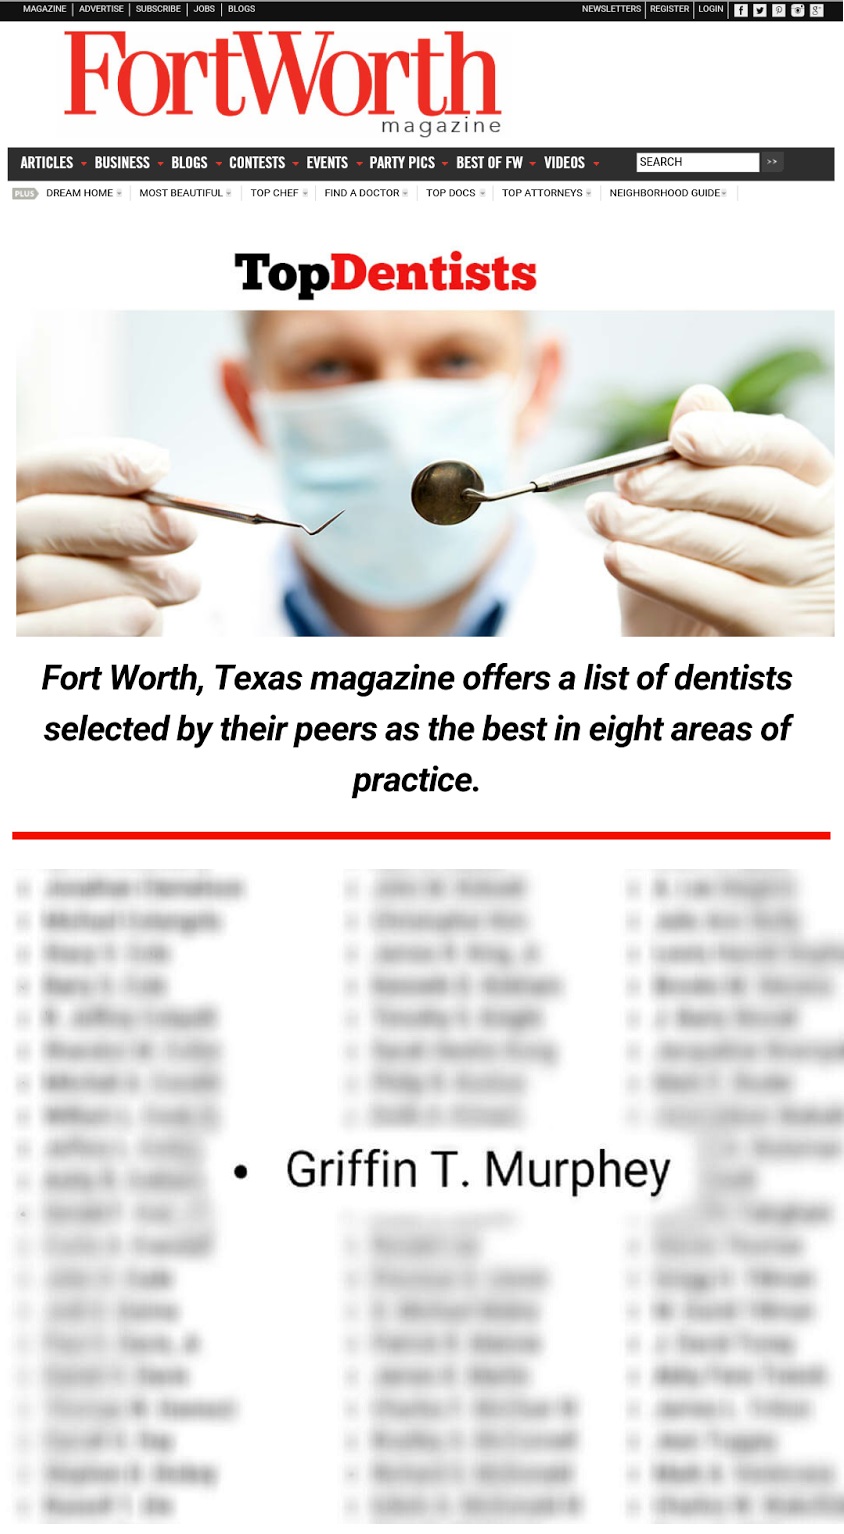 Top Dentists of Fort Worth